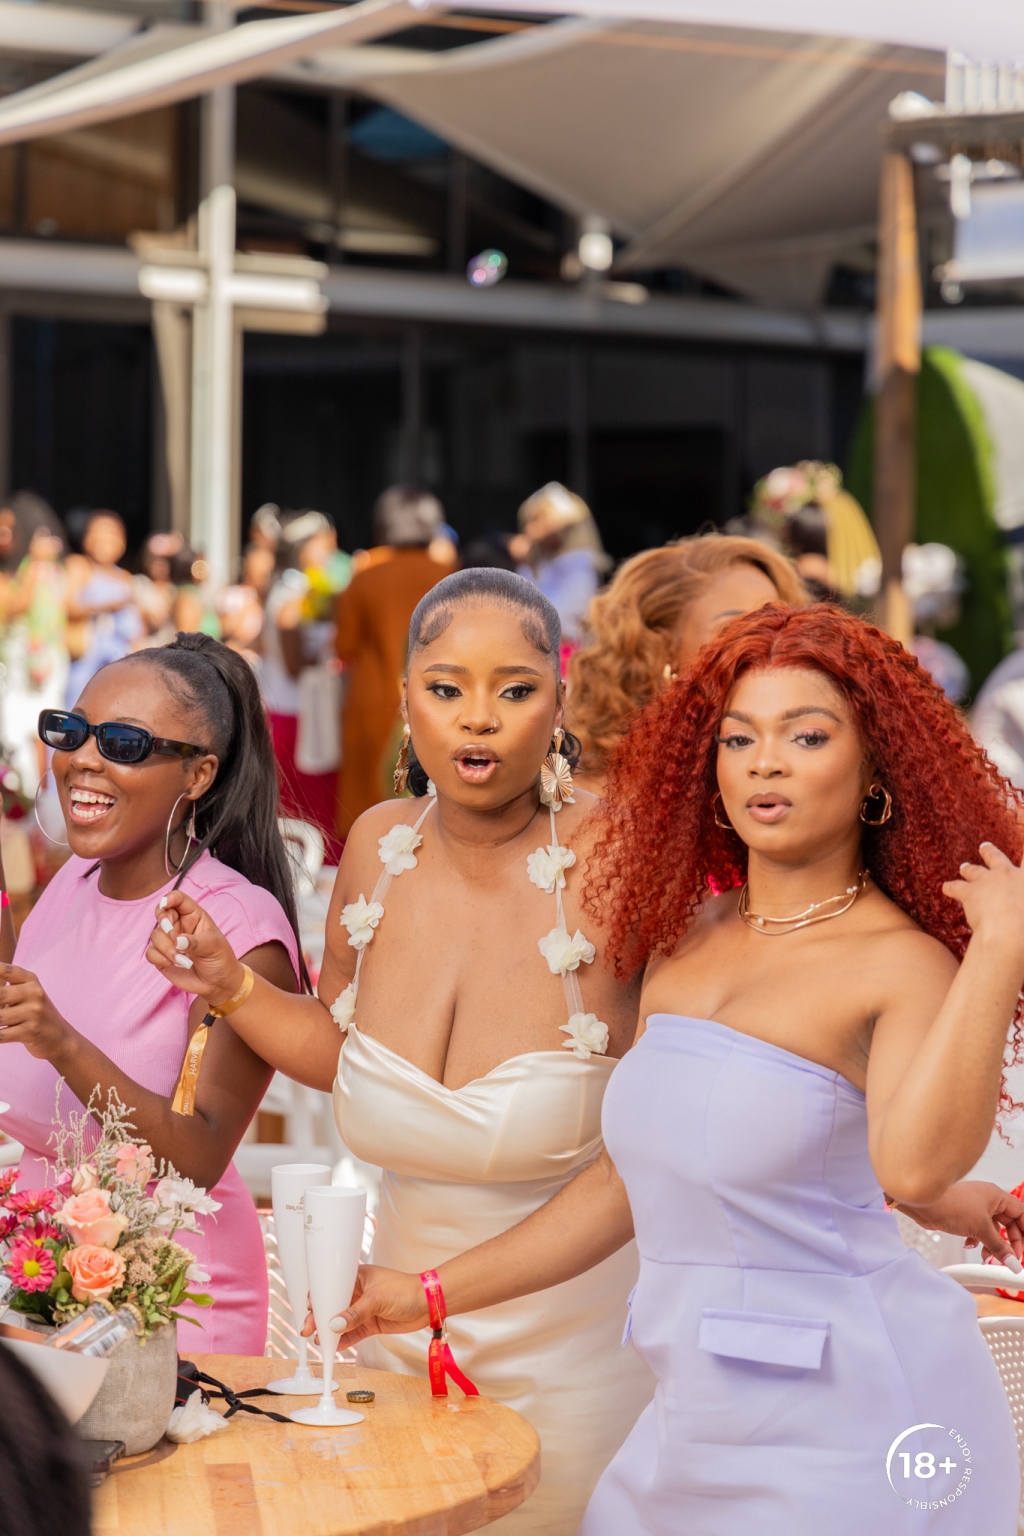 Guests enjoying the lively ambiance of Brutal Fruit's Spritzer Saturday Brunch, surrounded by friends, music, and refreshing drinks, embodying the spirit of South African celebration.